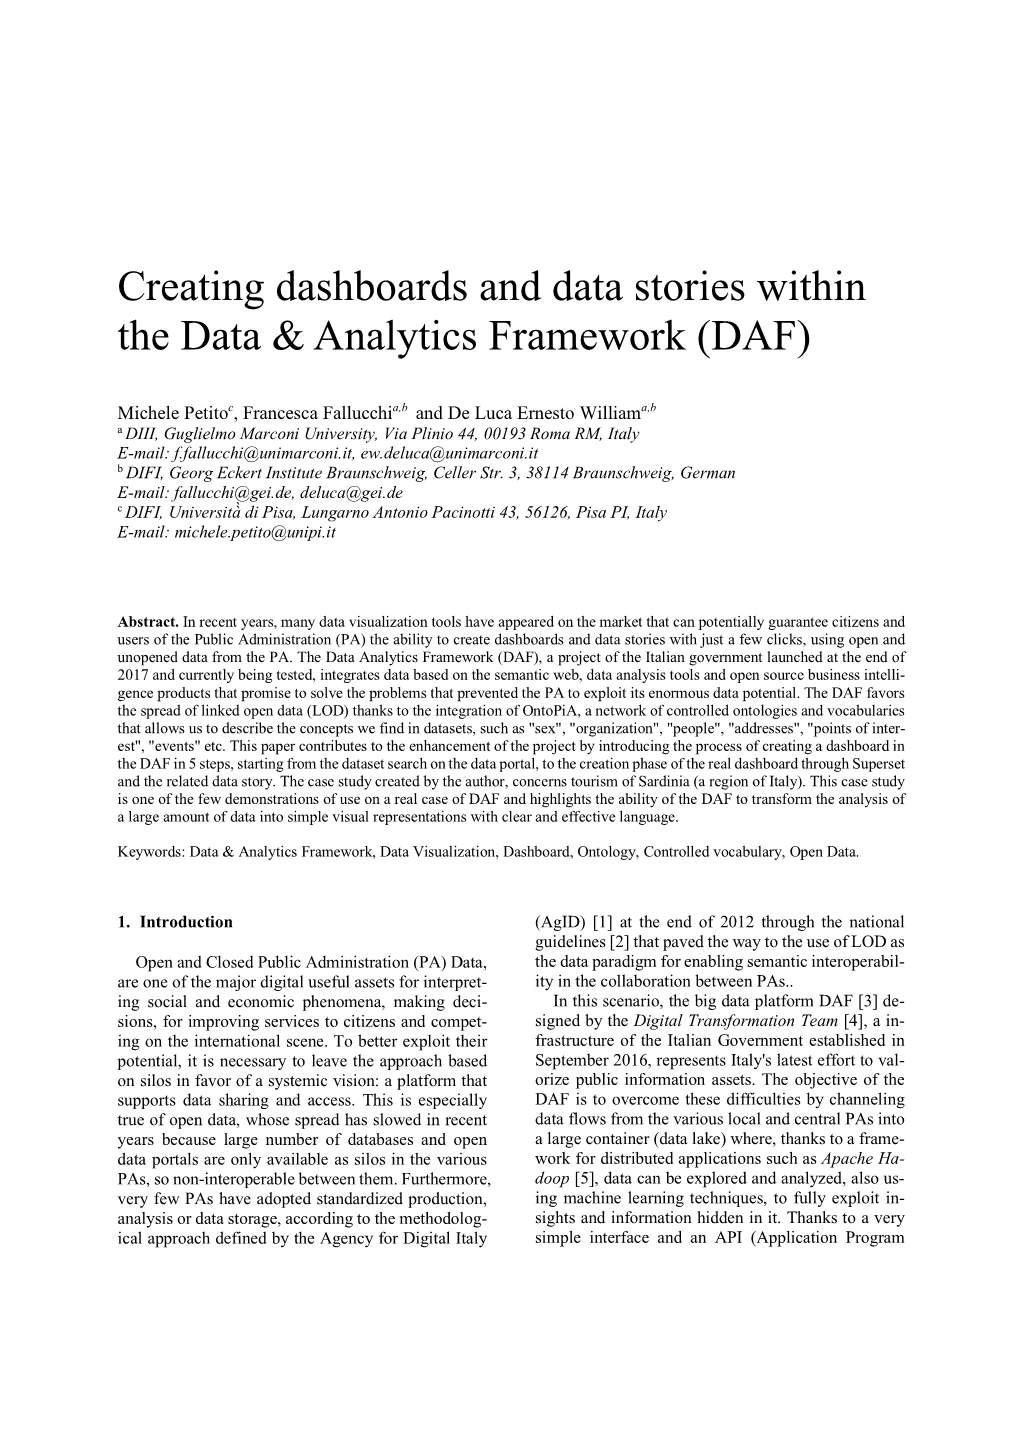 Creating Dashboards and Data Stories Within the Data & Analytics Framework (DAF)